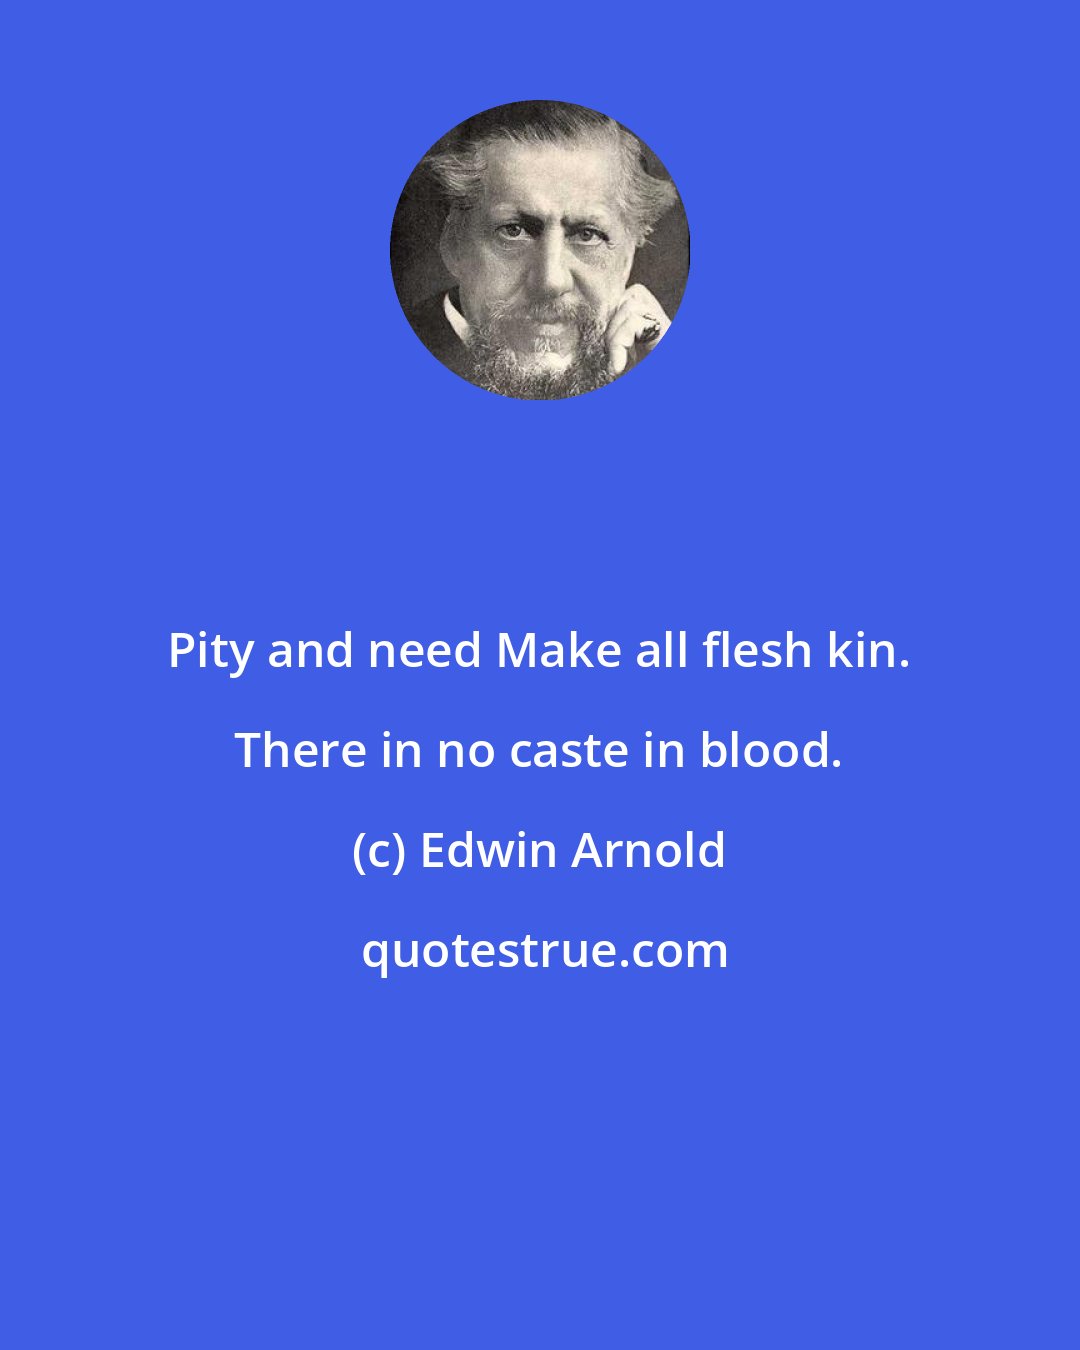 Edwin Arnold: Pity and need Make all flesh kin. There in no caste in blood.